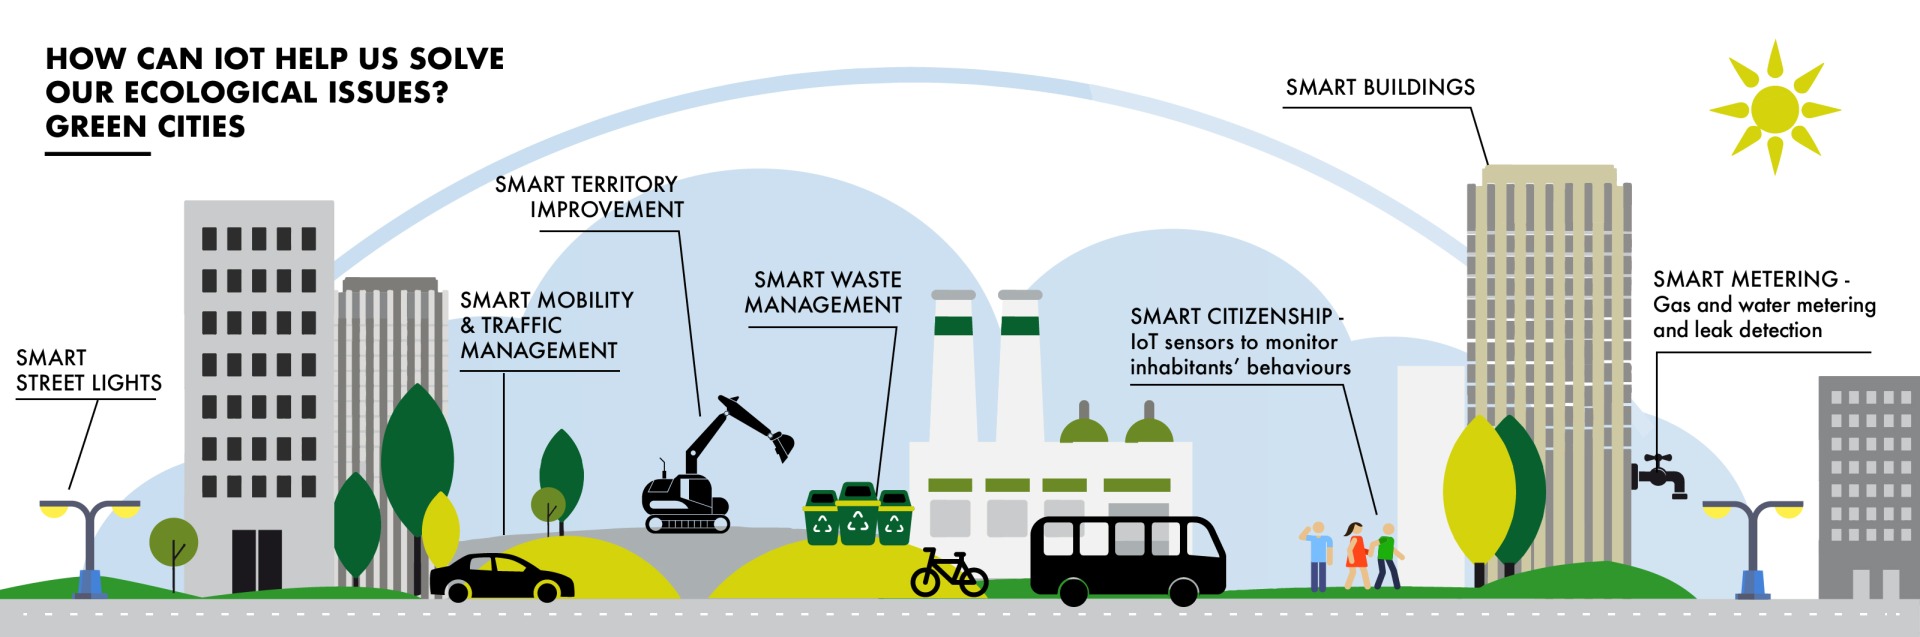 Opportunities_to_Improve_Energy_Consumption_in_Smart_Cities.jpeg